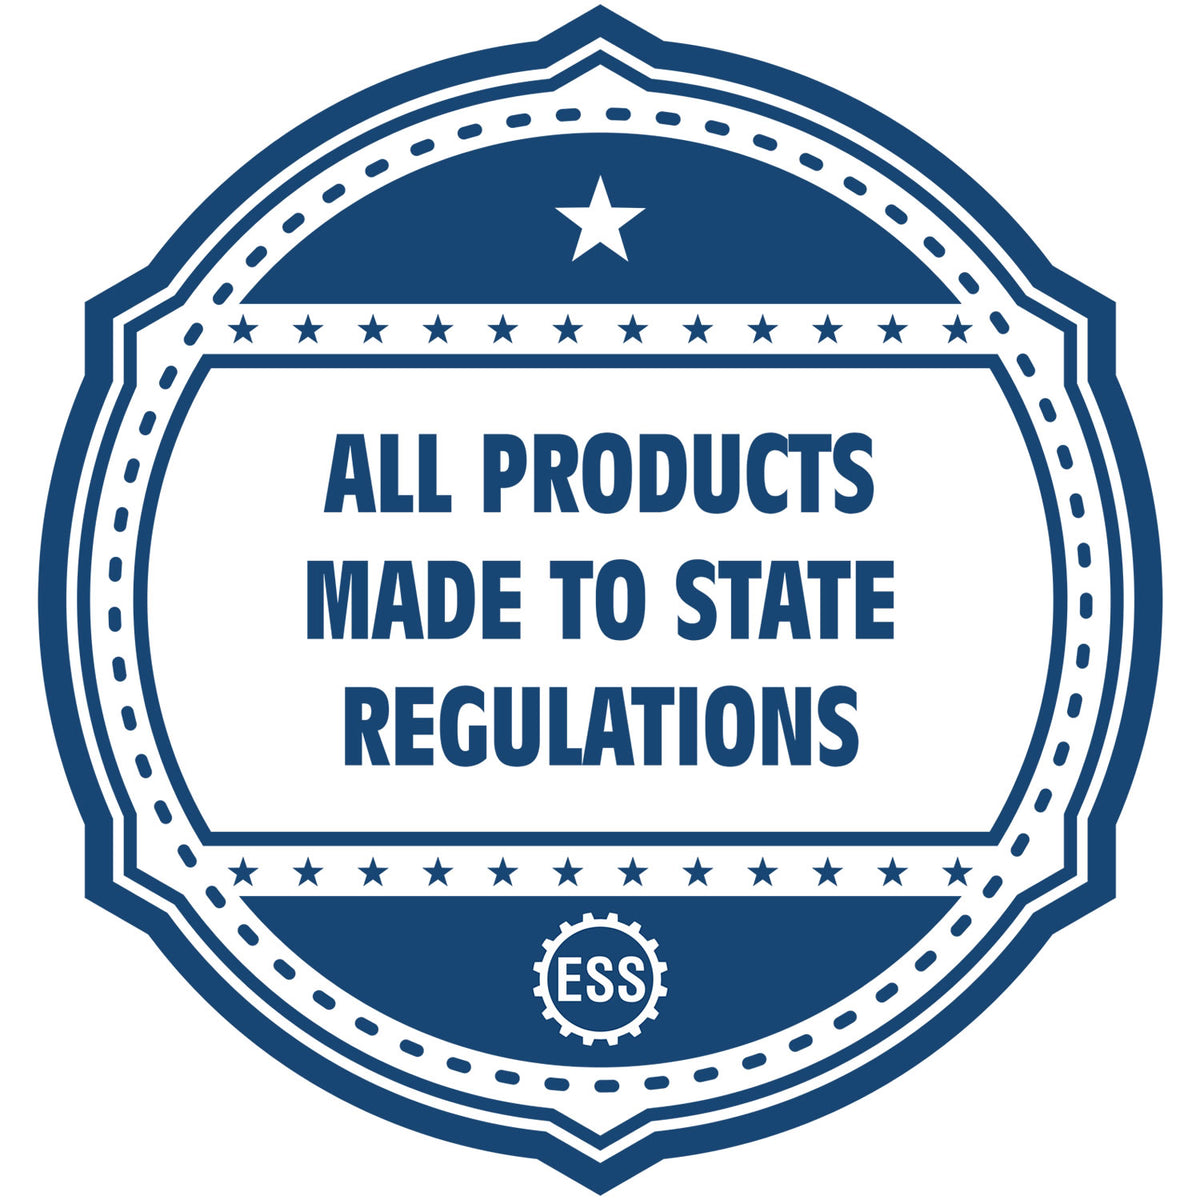 An icon or badge element for the Handheld Maryland Architect Seal Embosser showing that this product is made in compliance with state regulations.